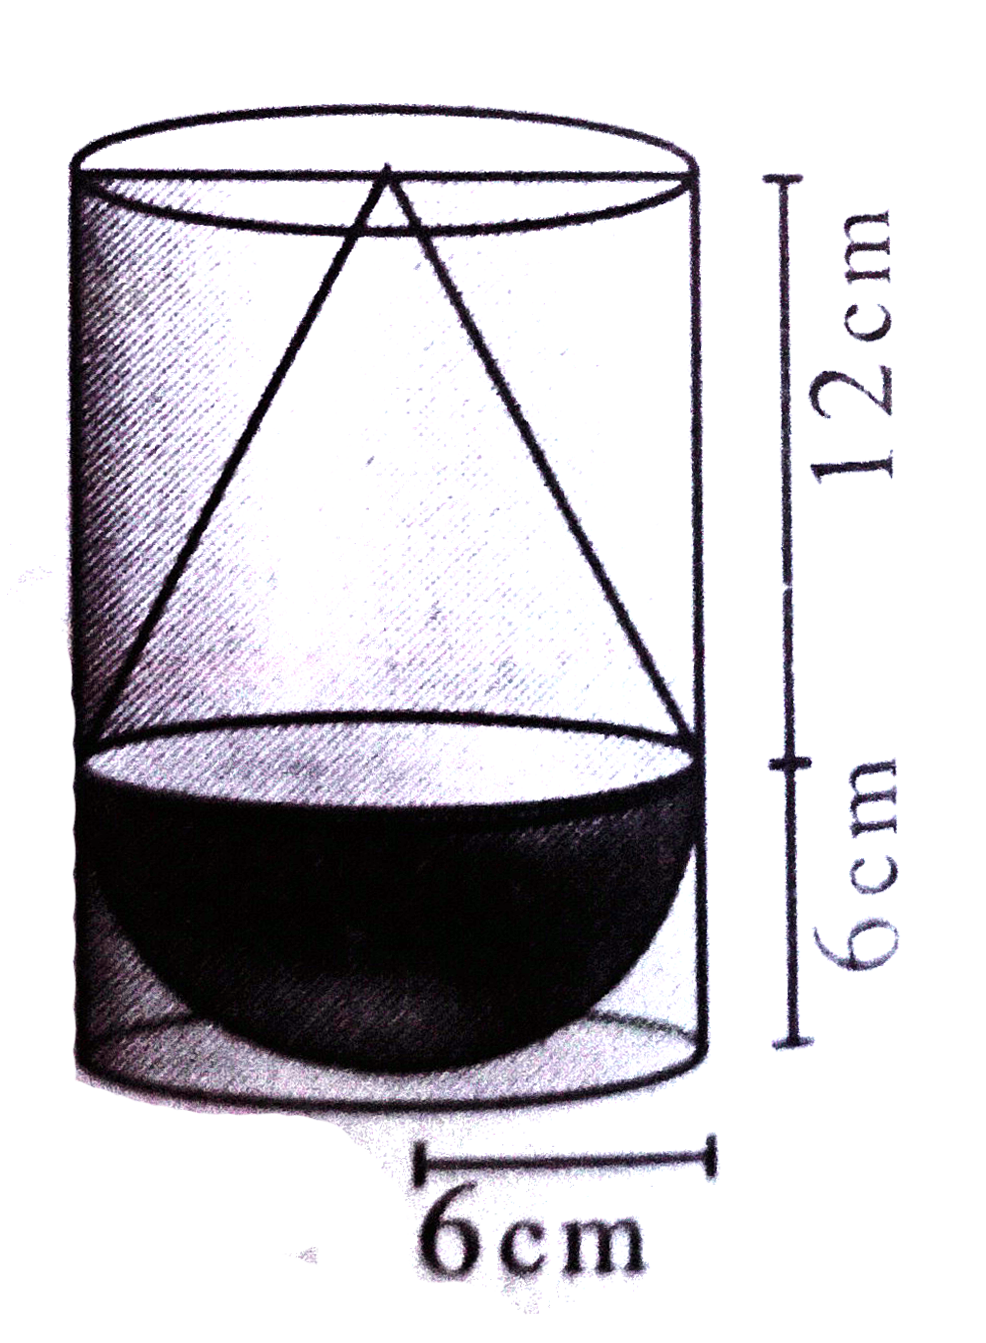 A solid consisting of a right circular cone of height 12 cm and radius 6 cm standing on a hemisphere of radius 6 cm is placed upright in a right circular cylinder full of water such that it touches the bottom. Find the volume of the water displaced out of the cylinder, if the radius of the cylinder is 6 cm and height is 18 cm.